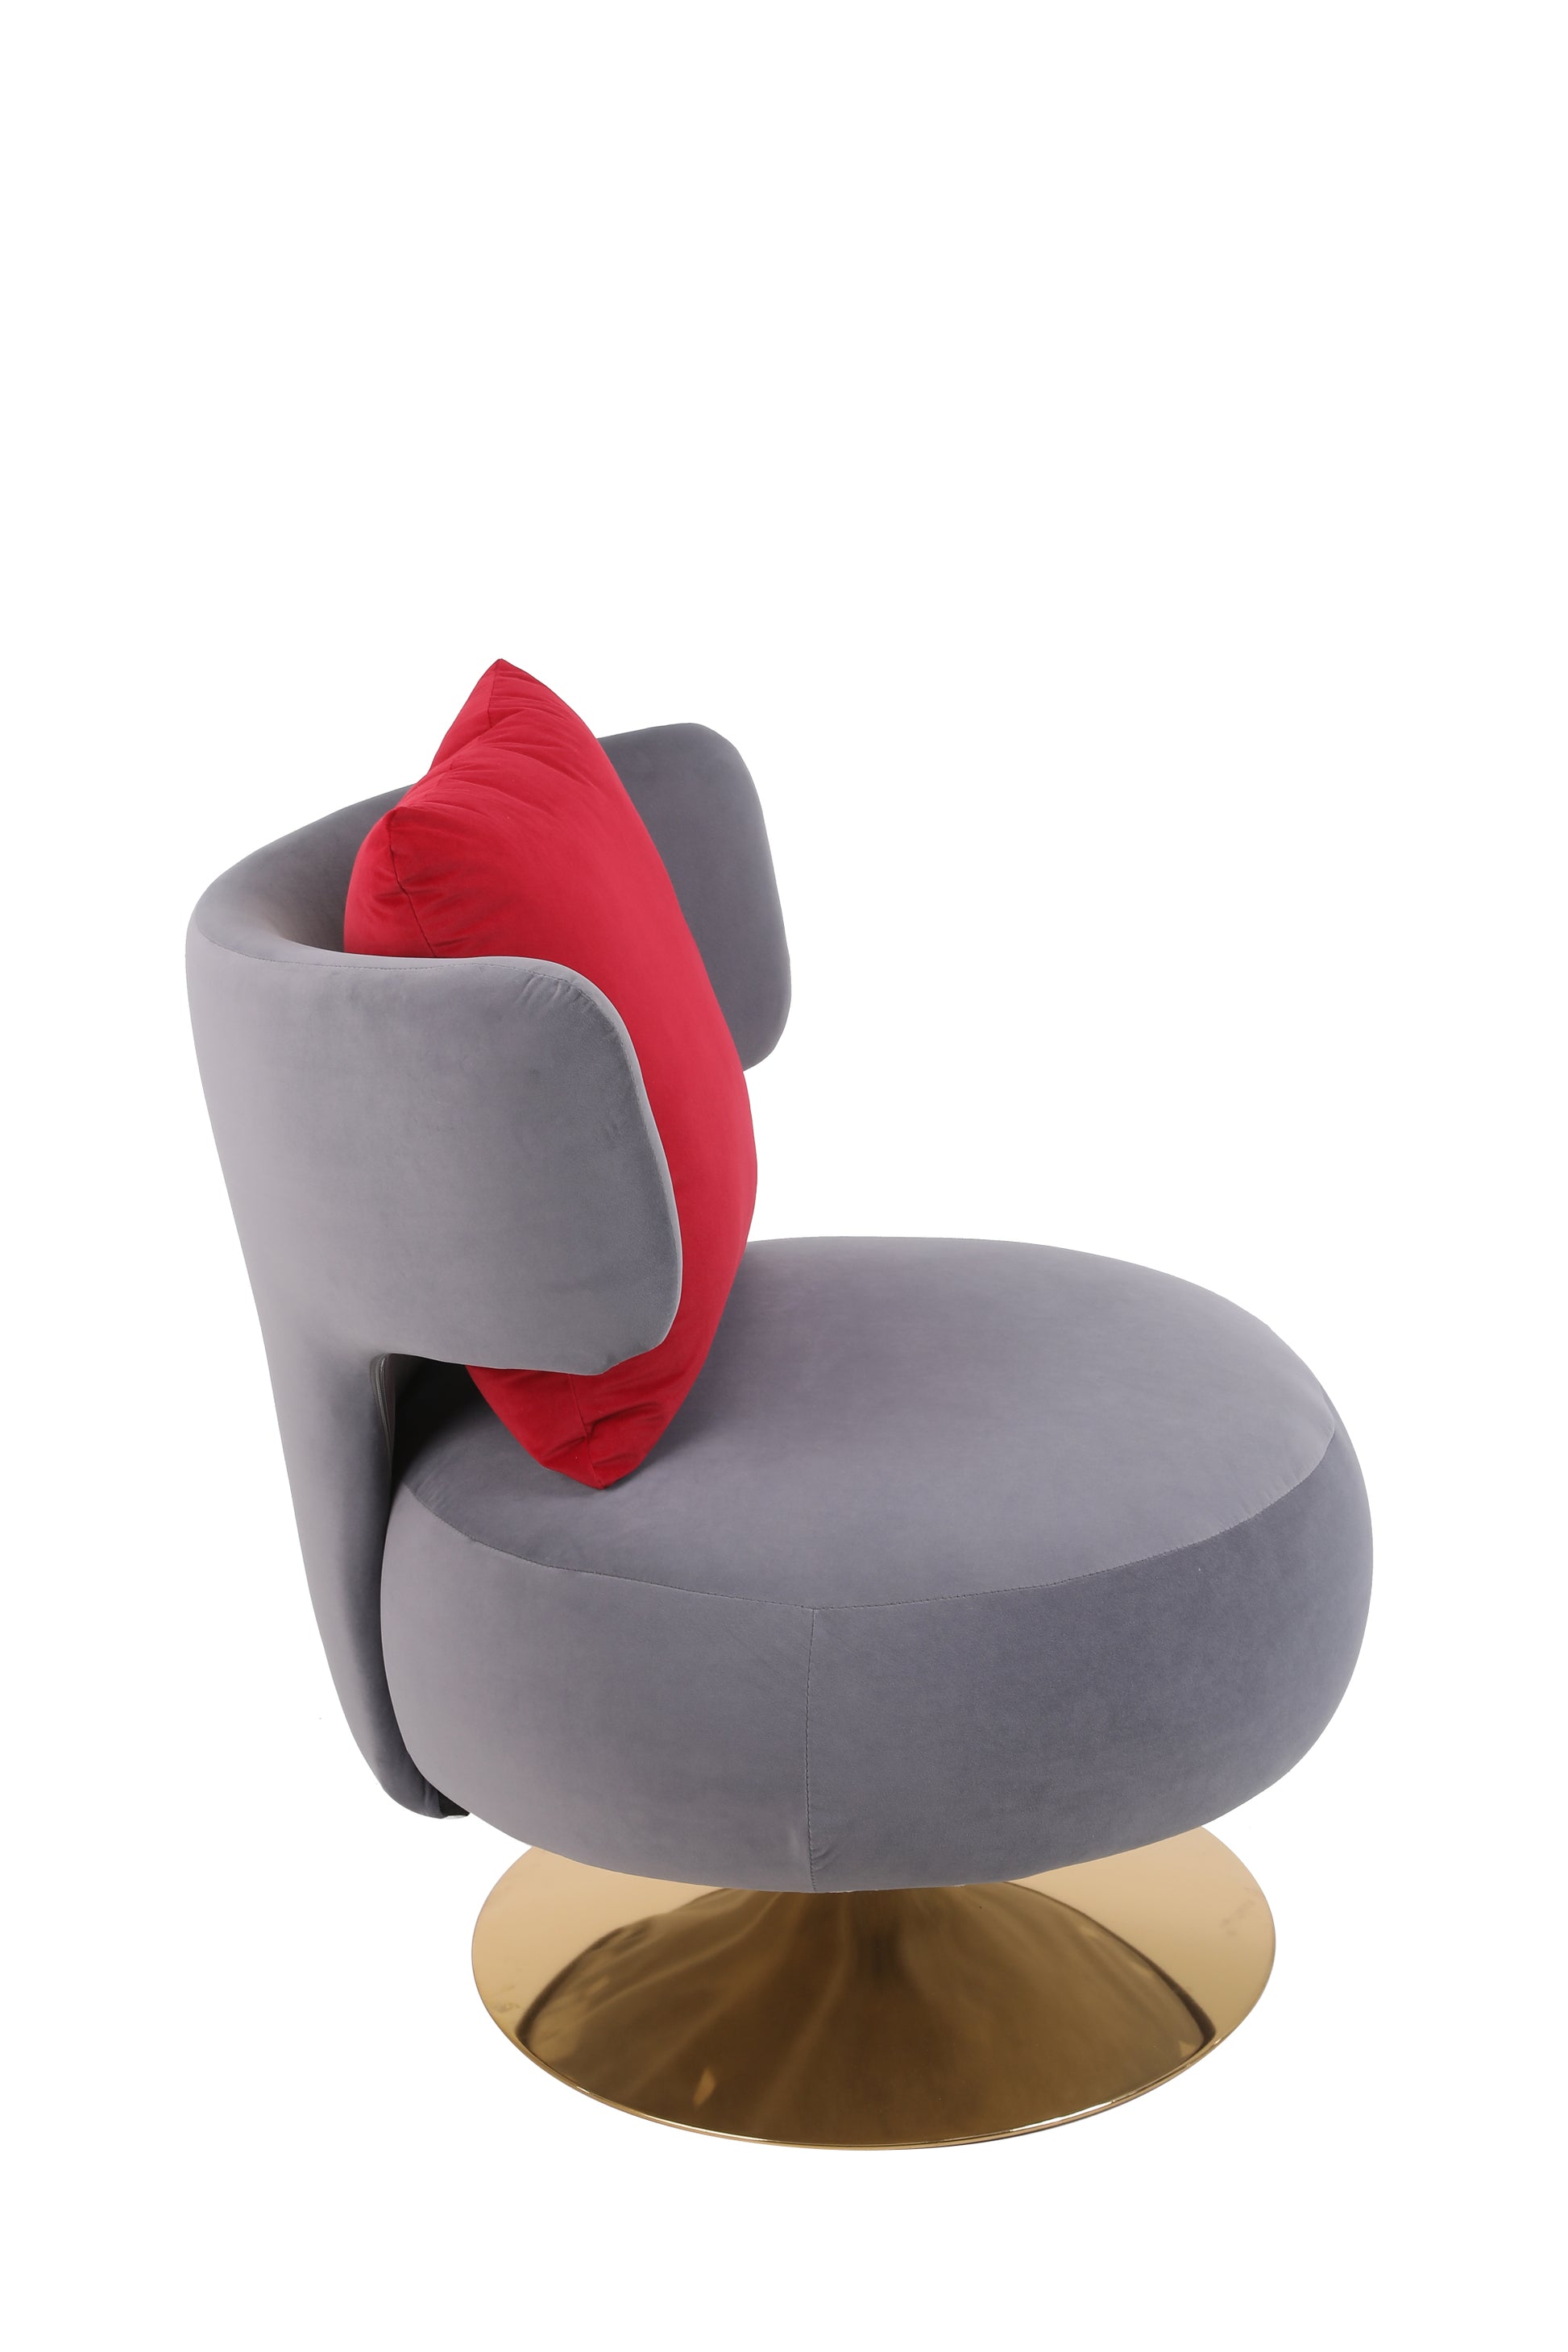 Swivel Accent Chair Armchair, Round Barrel Chair in Fabric for Living Room Bedroom - Enova Luxe Home Store